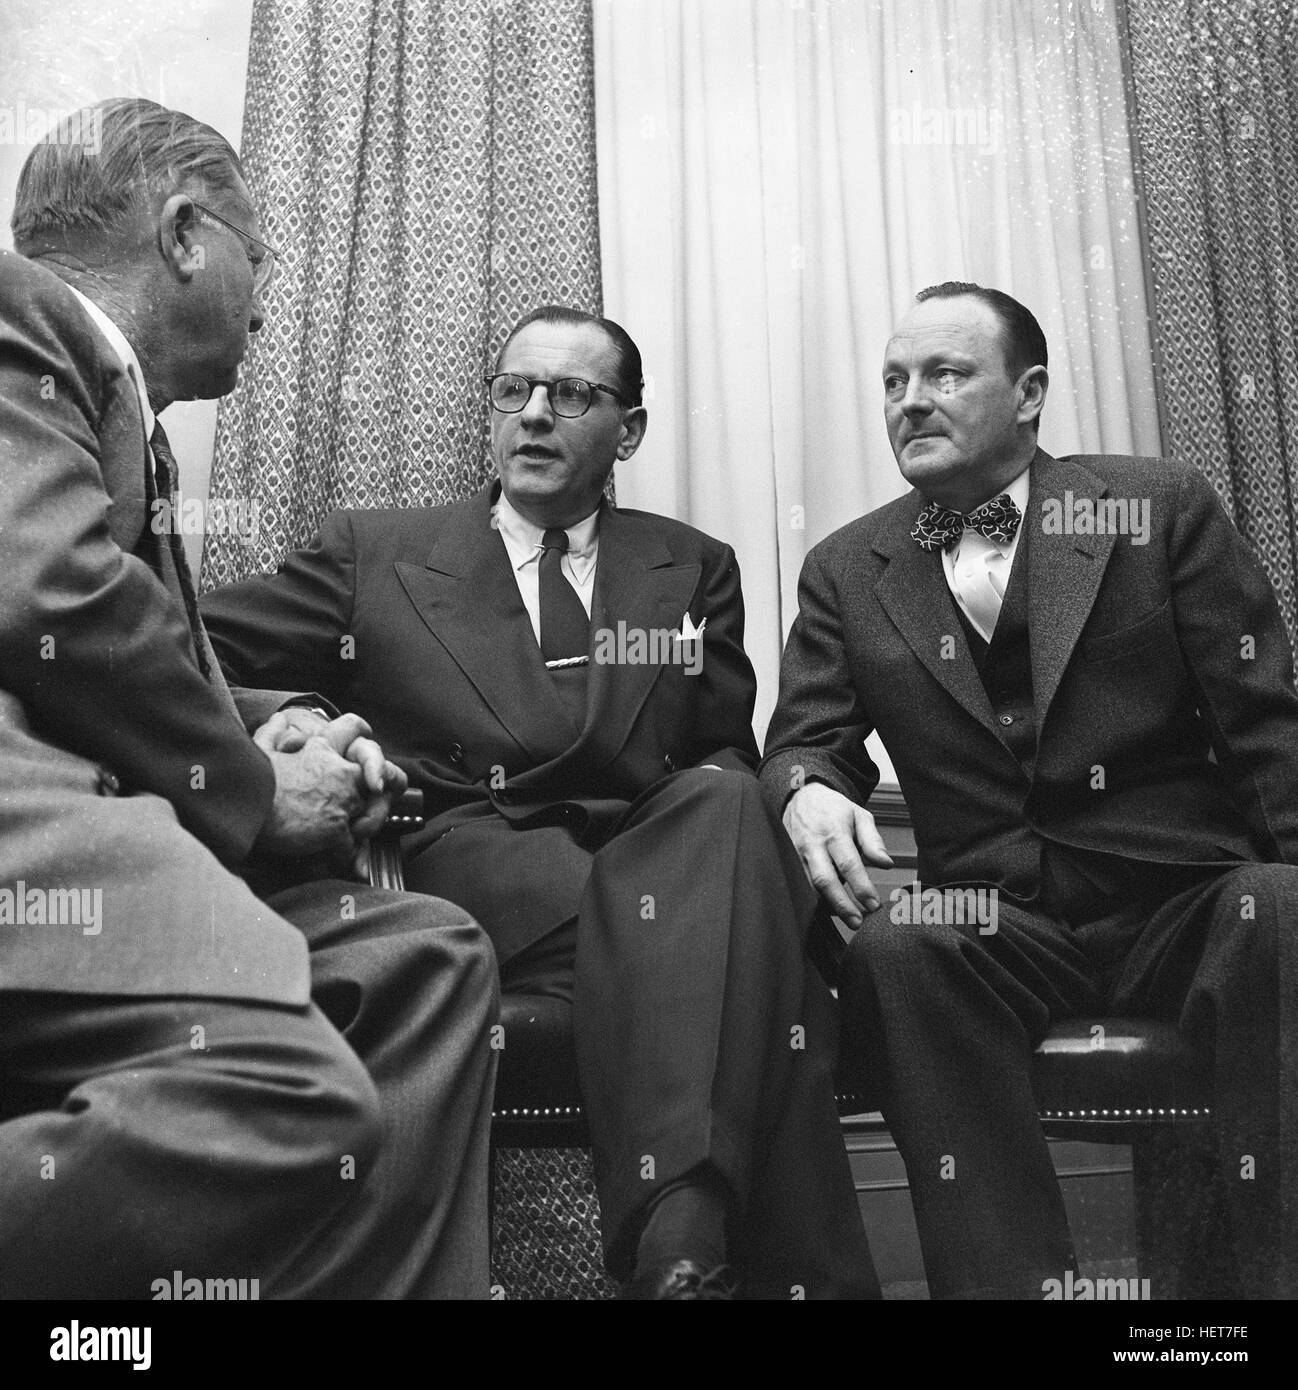 Erle Stanley Gardner, on left, speaking with James McGrattan and William Kerwick, the prosecutors who convicted Willie Sutton. Stock Photo